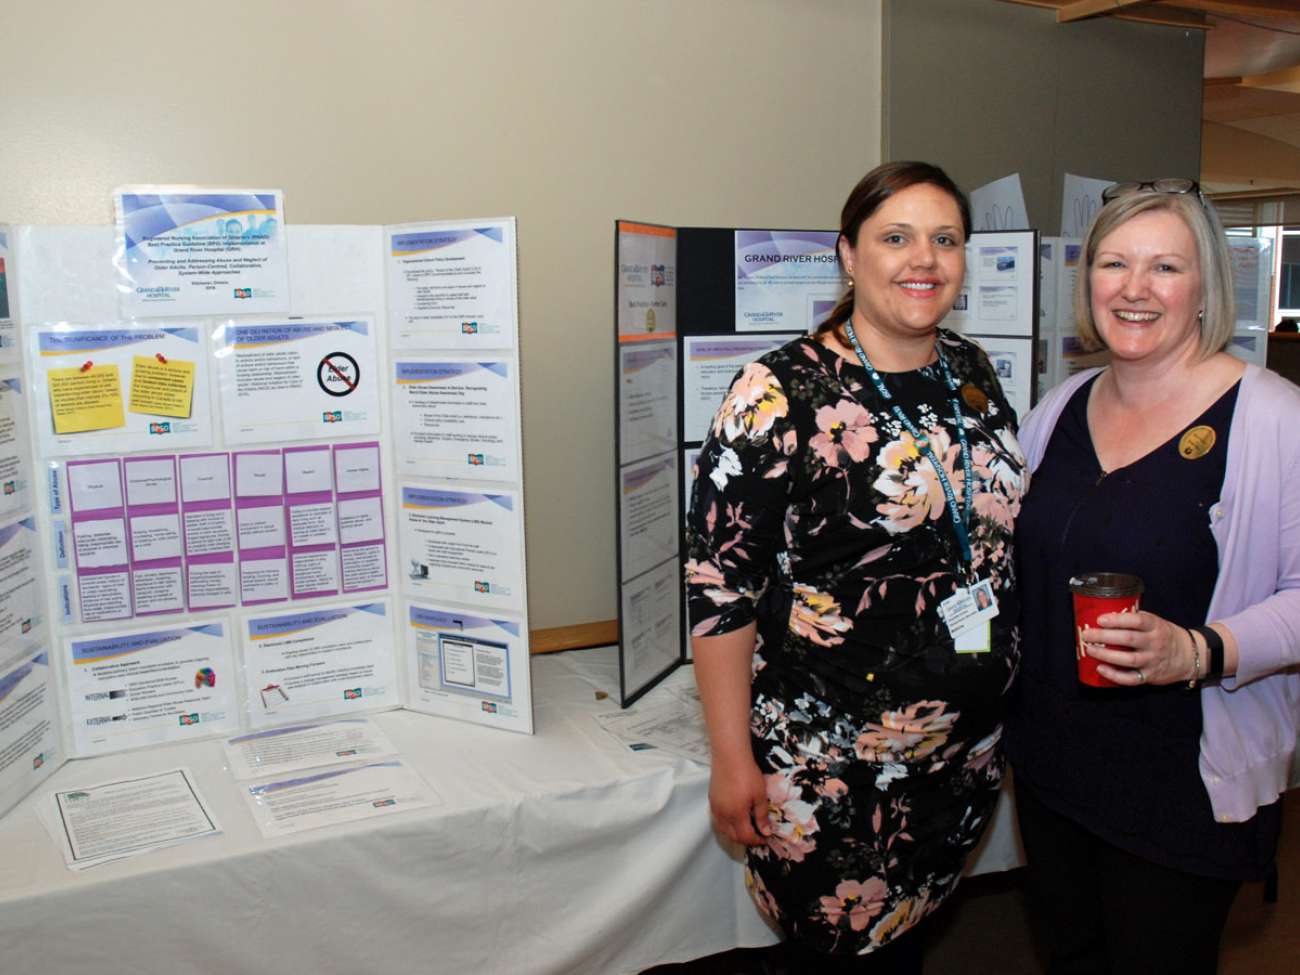 Staff members took part in the expo to show how their efforts have led to improved care.